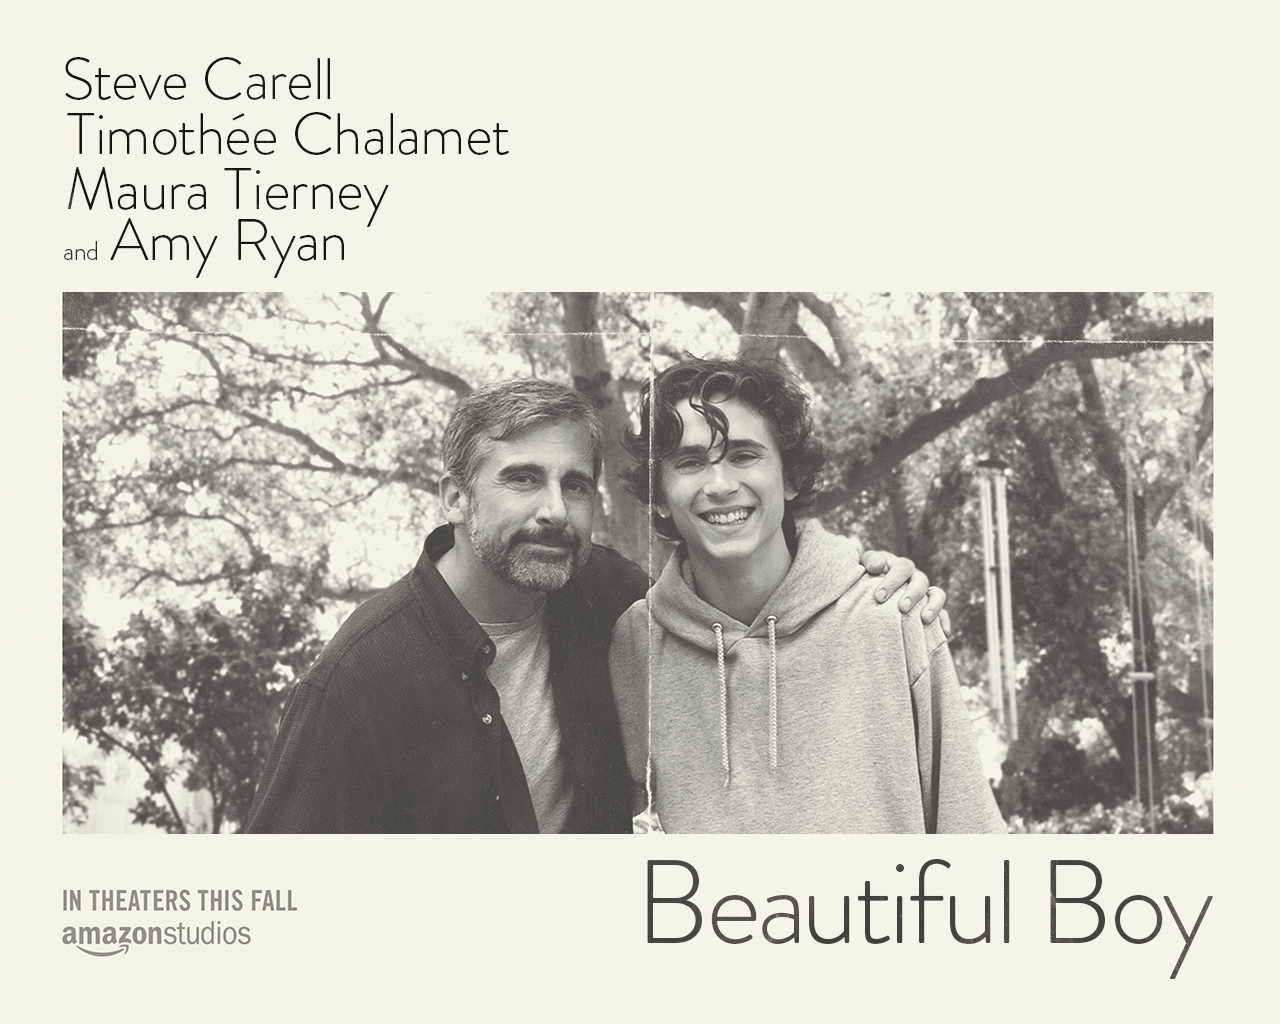 A black and white image of Steve Carell and Timothee Chalamet with the text 